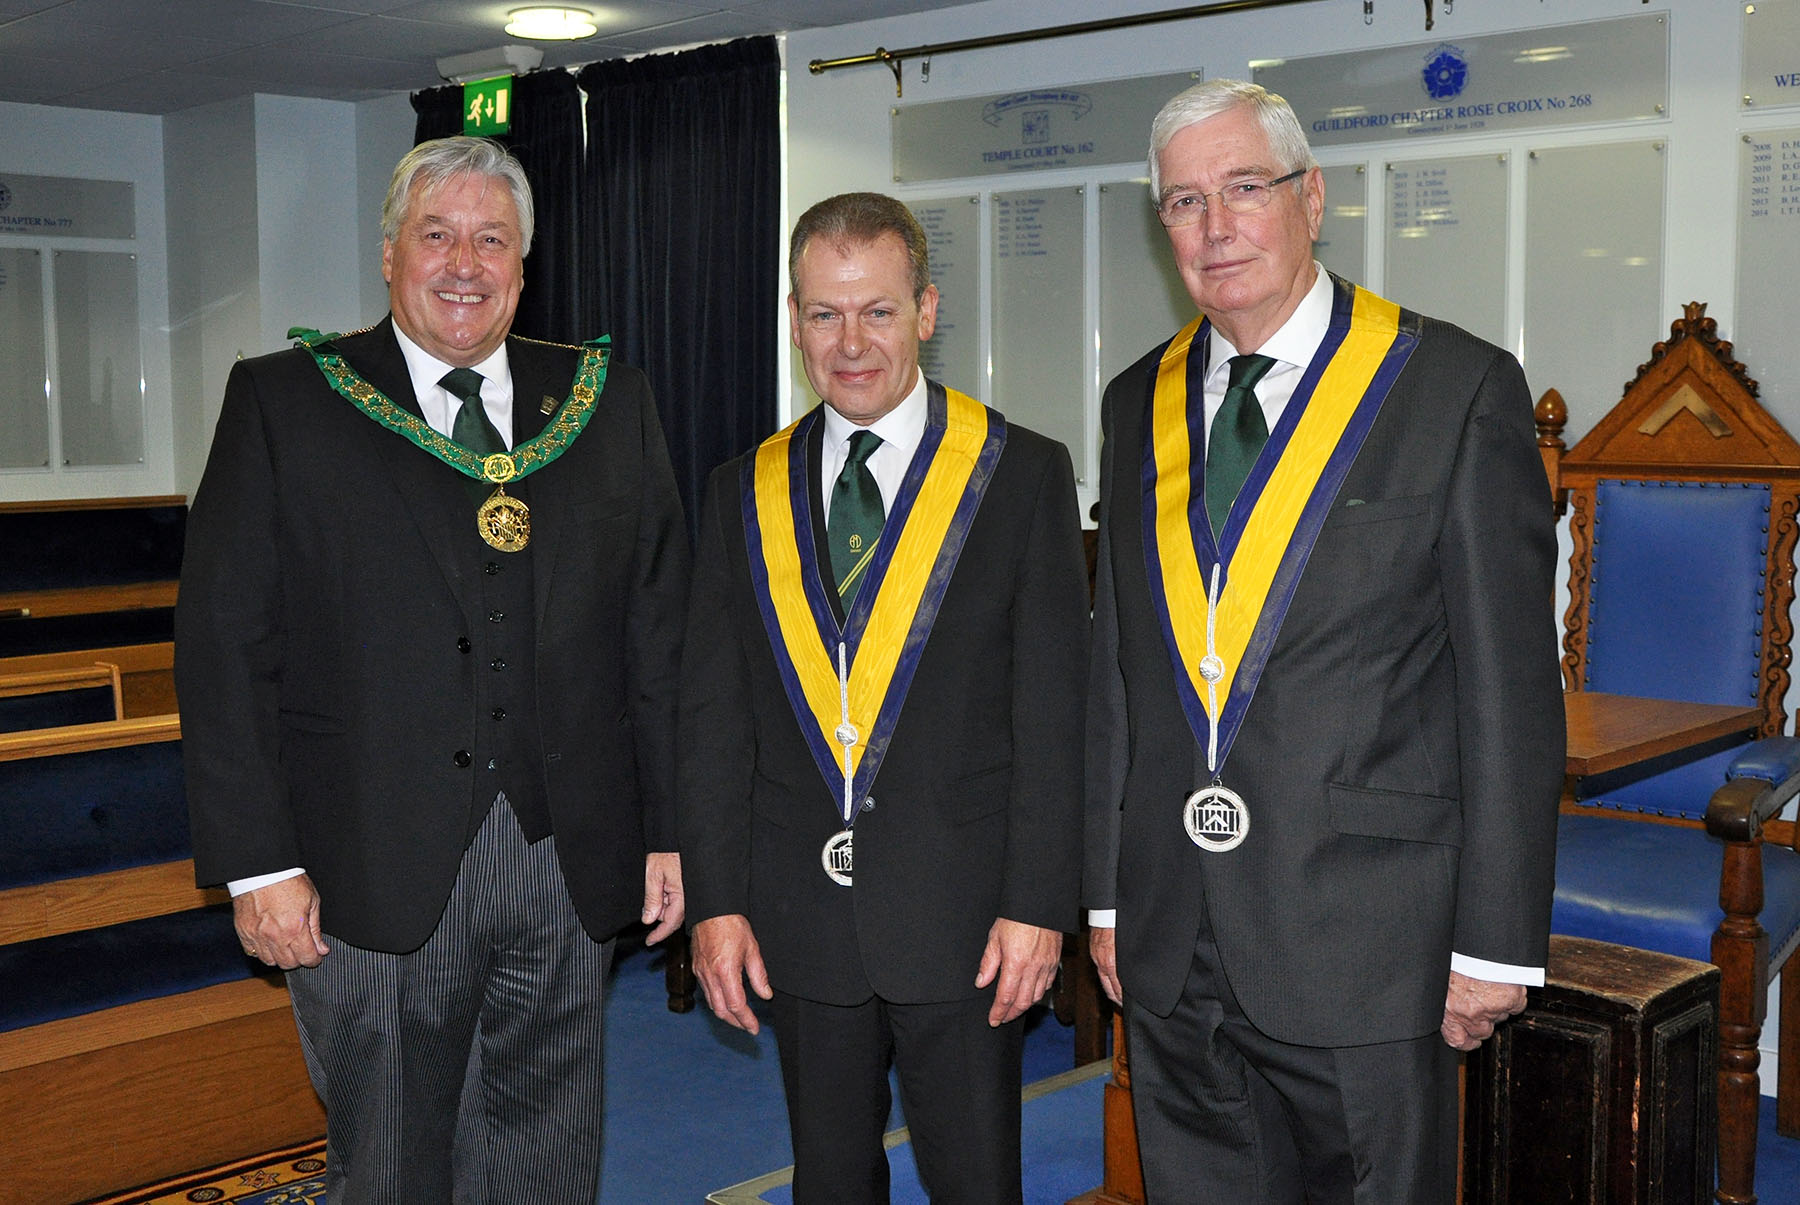 Our Deputy Provincial Grand Supreme Ruler joins the Allied Masonic Degrees